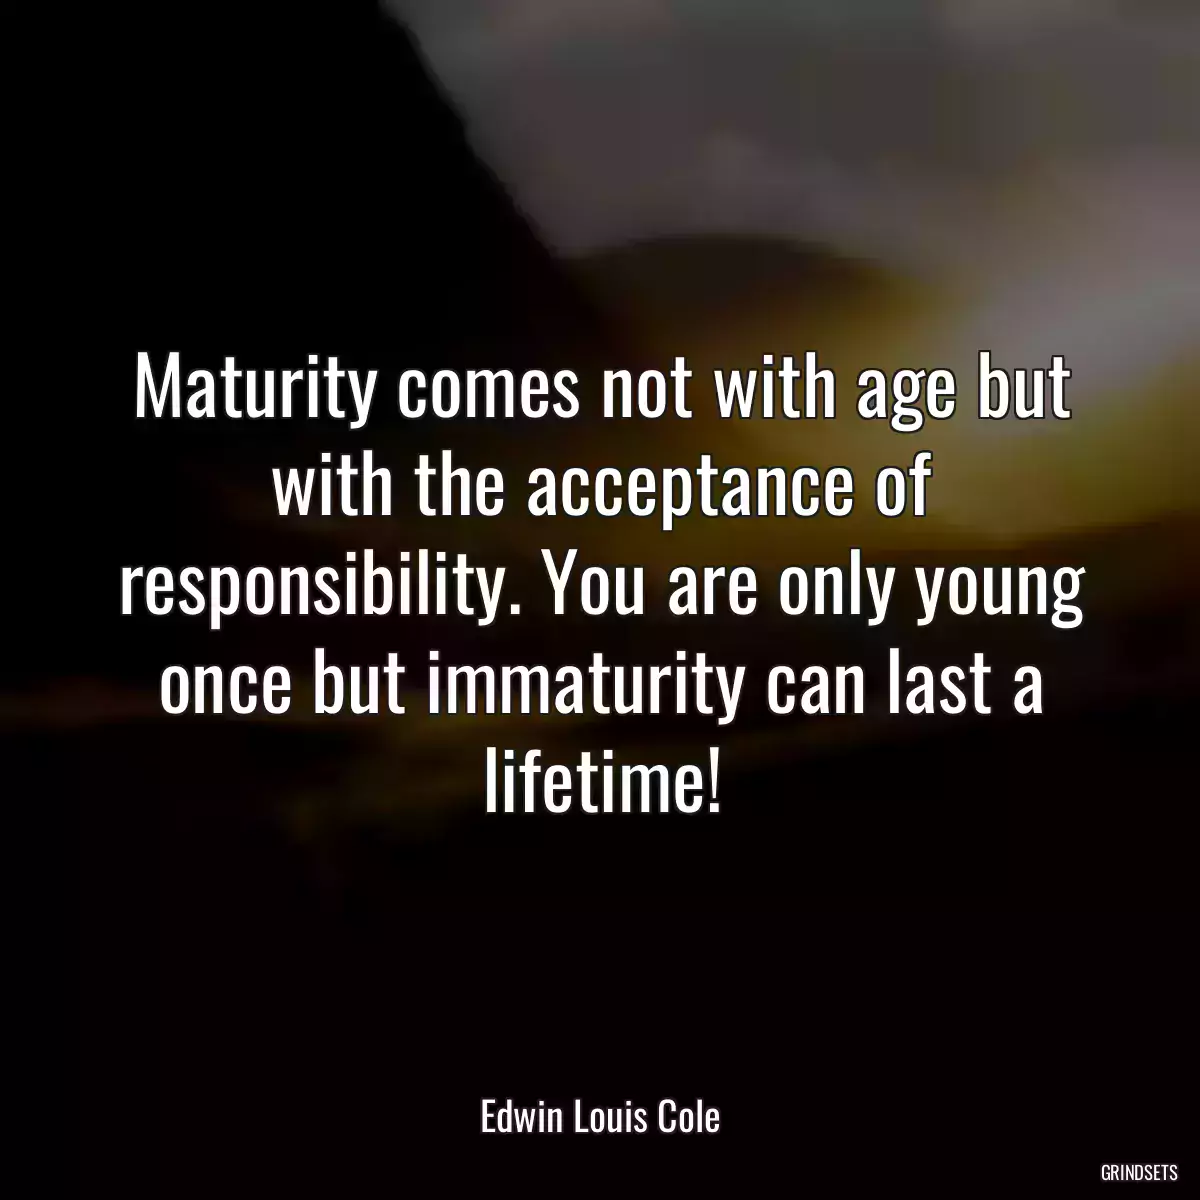 Maturity comes not with age but with the acceptance of responsibility. You are only young once but immaturity can last a lifetime!